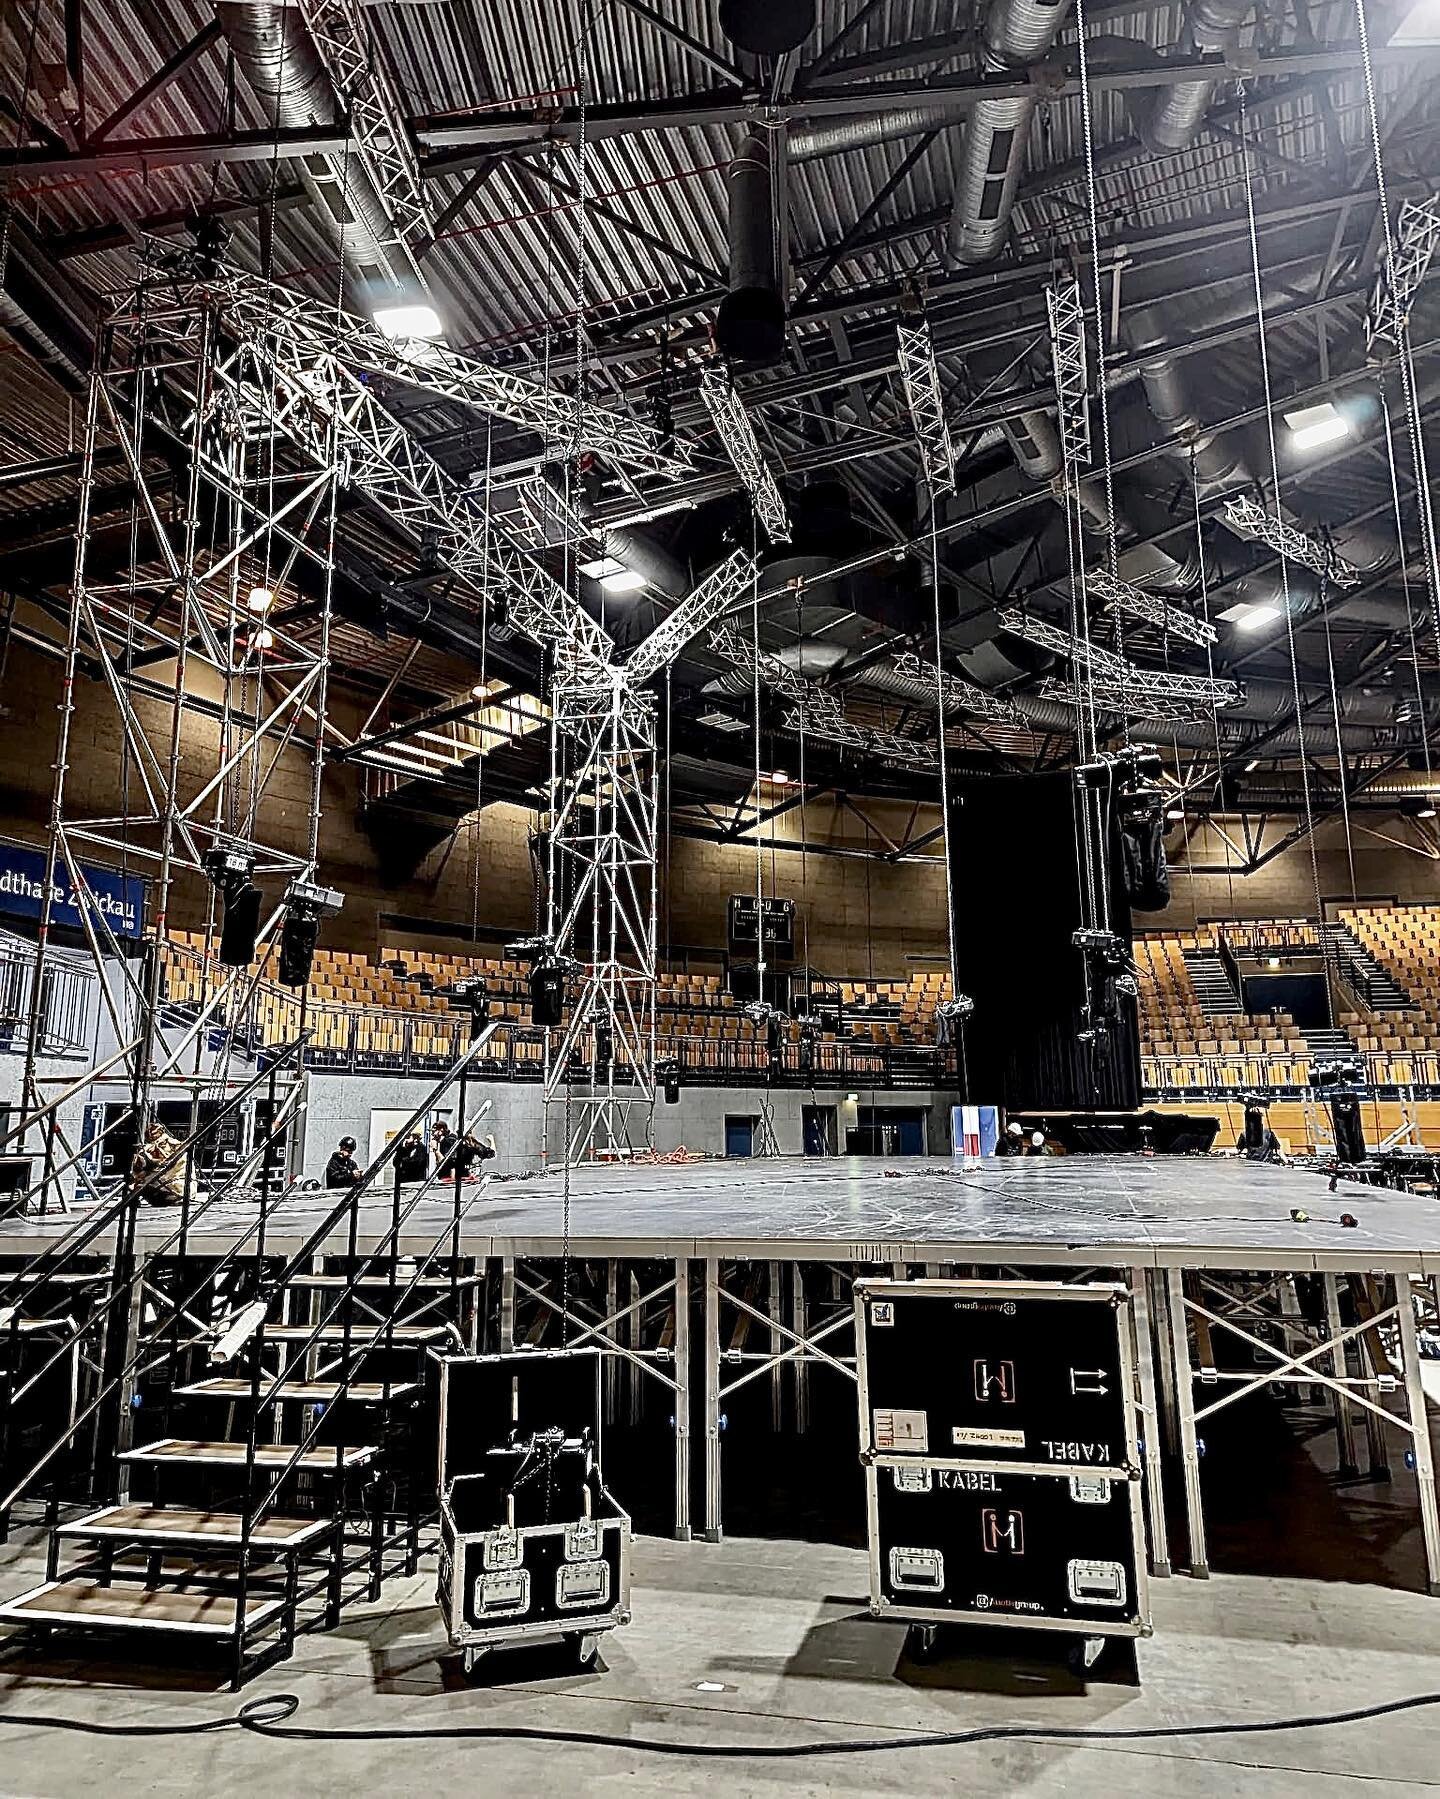 PreRig for the rehearsals and the start of the tour from @kerstinott_official 💫
____________________
📷: @leon_doneck 
#slvbones
#riggerslife #rigginglife #riggingstage #rigging #rigger #case #prerig #layherscaffolding #stage